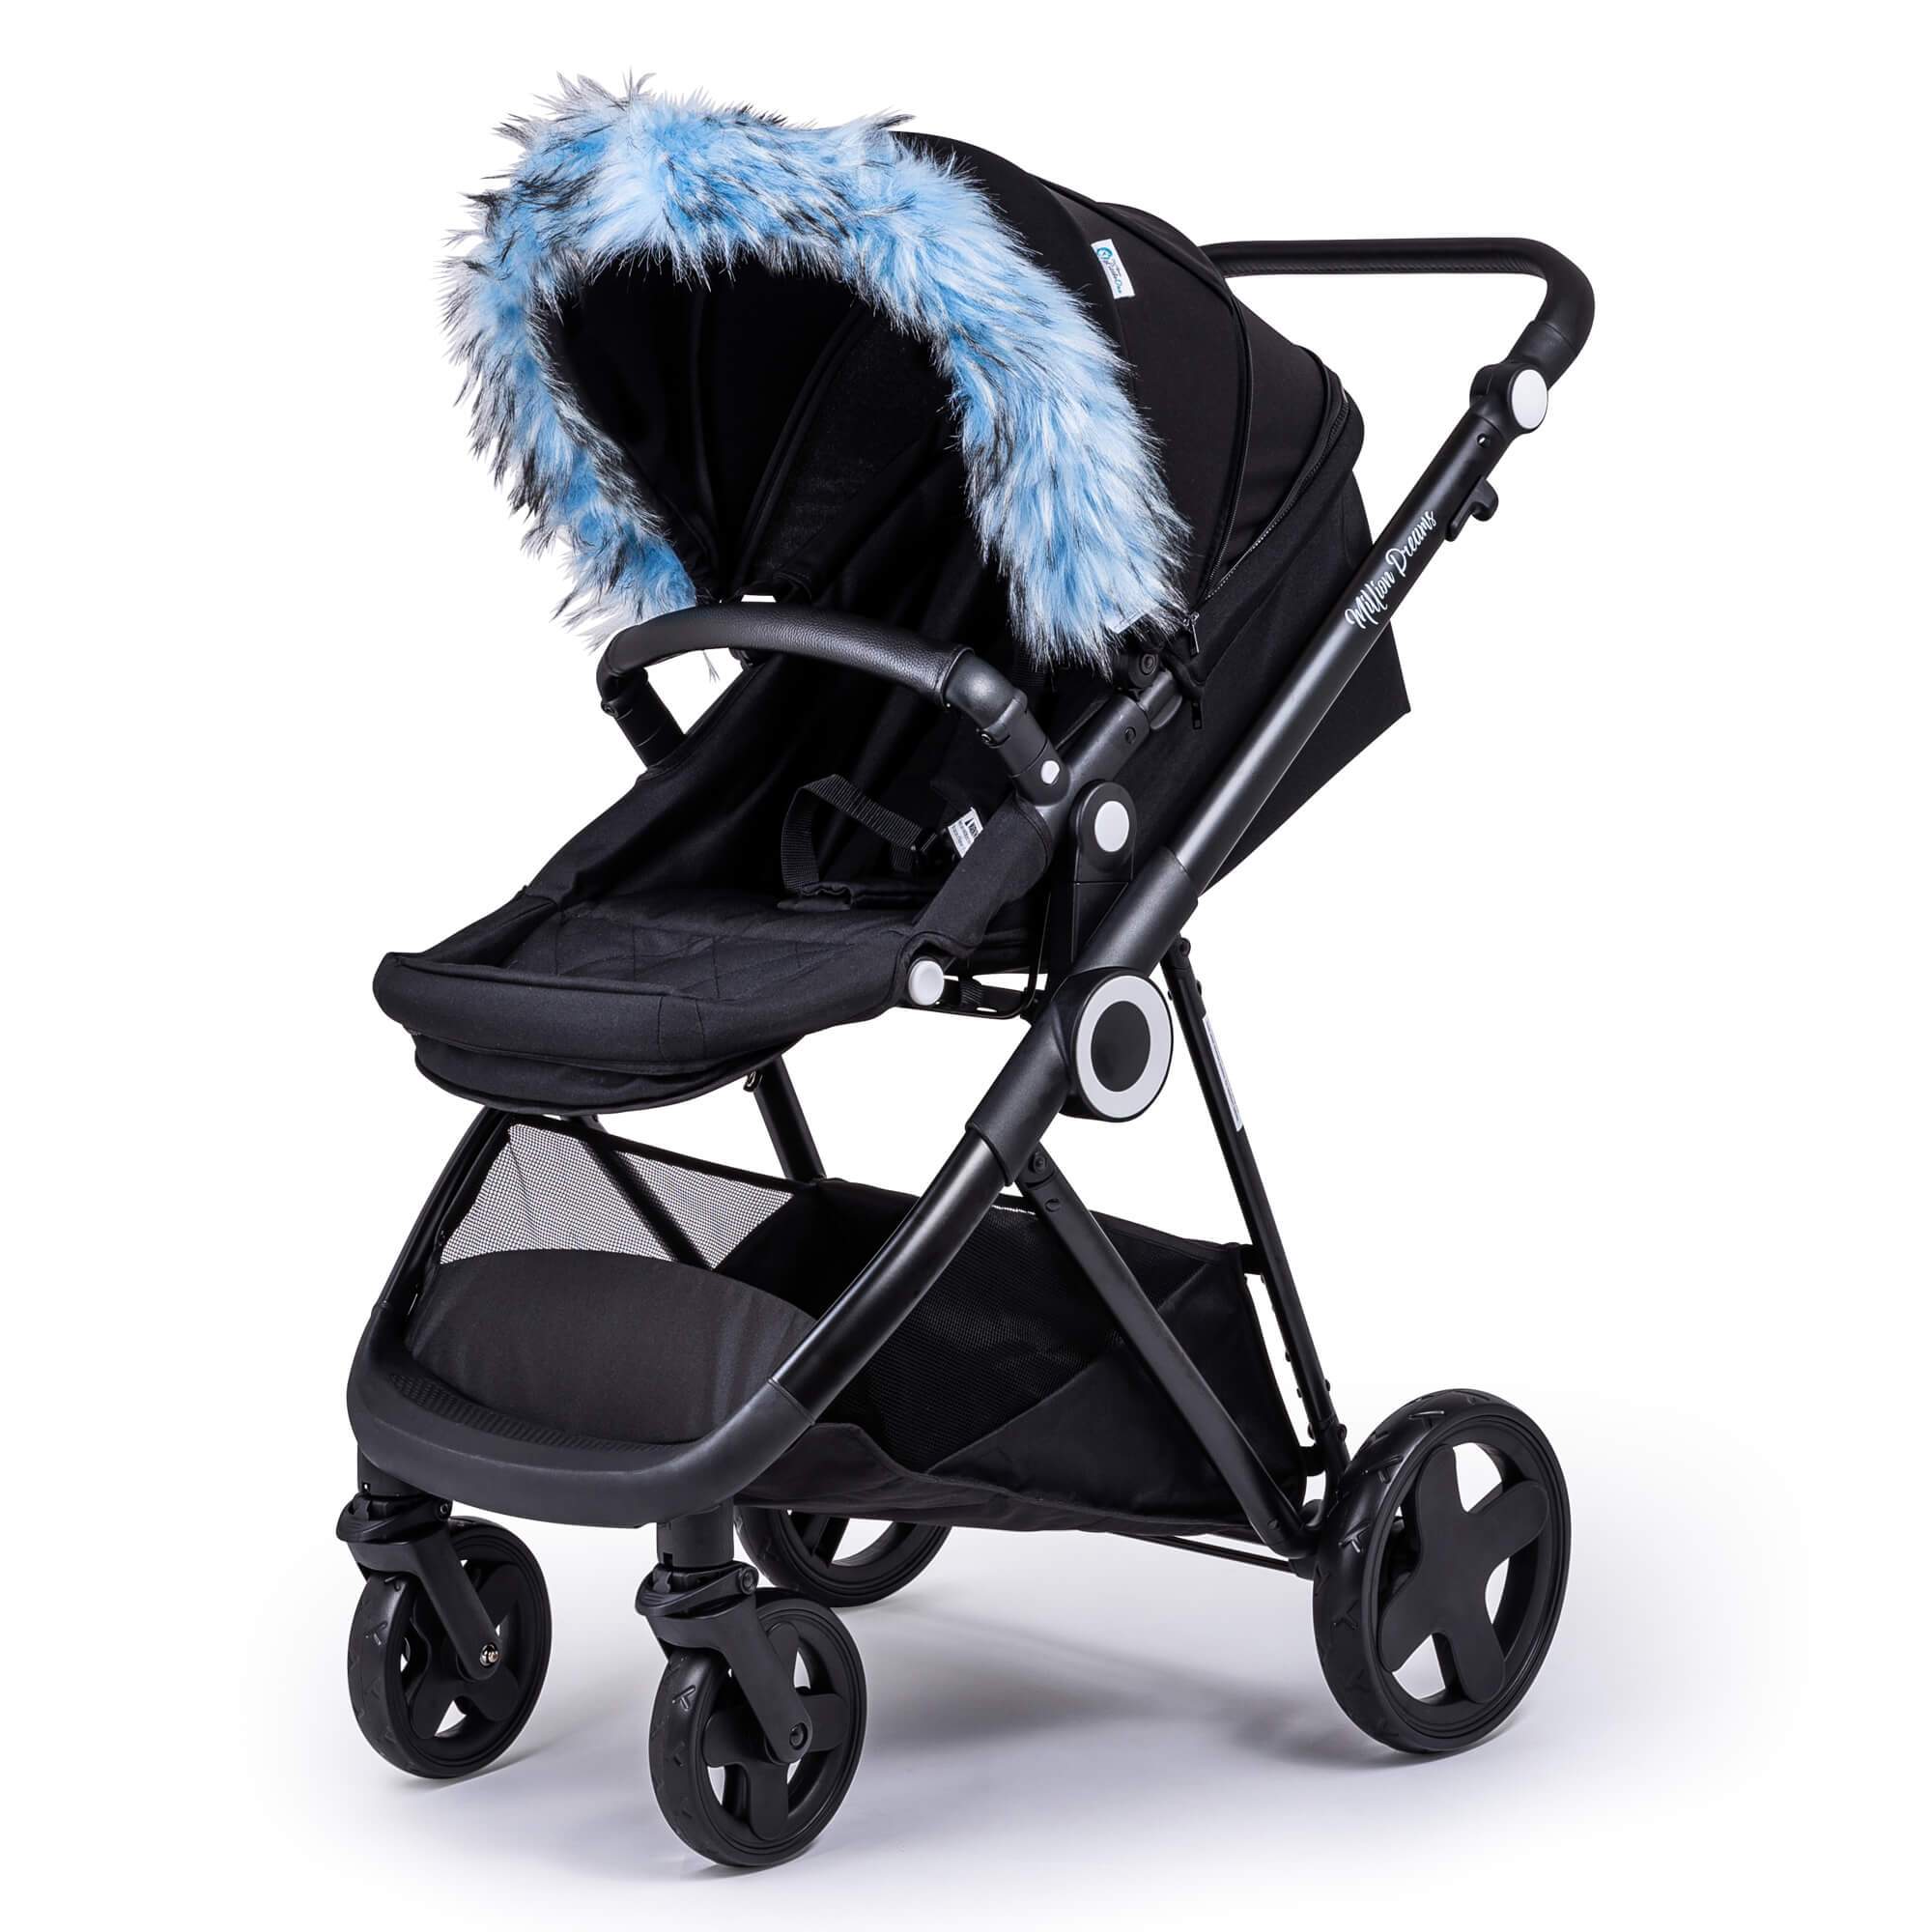 Pram Fur Hood Trim Attachment For Pushchair Compatible with Kinderkraft - Light Blue / Fits All Models | For Your Little One